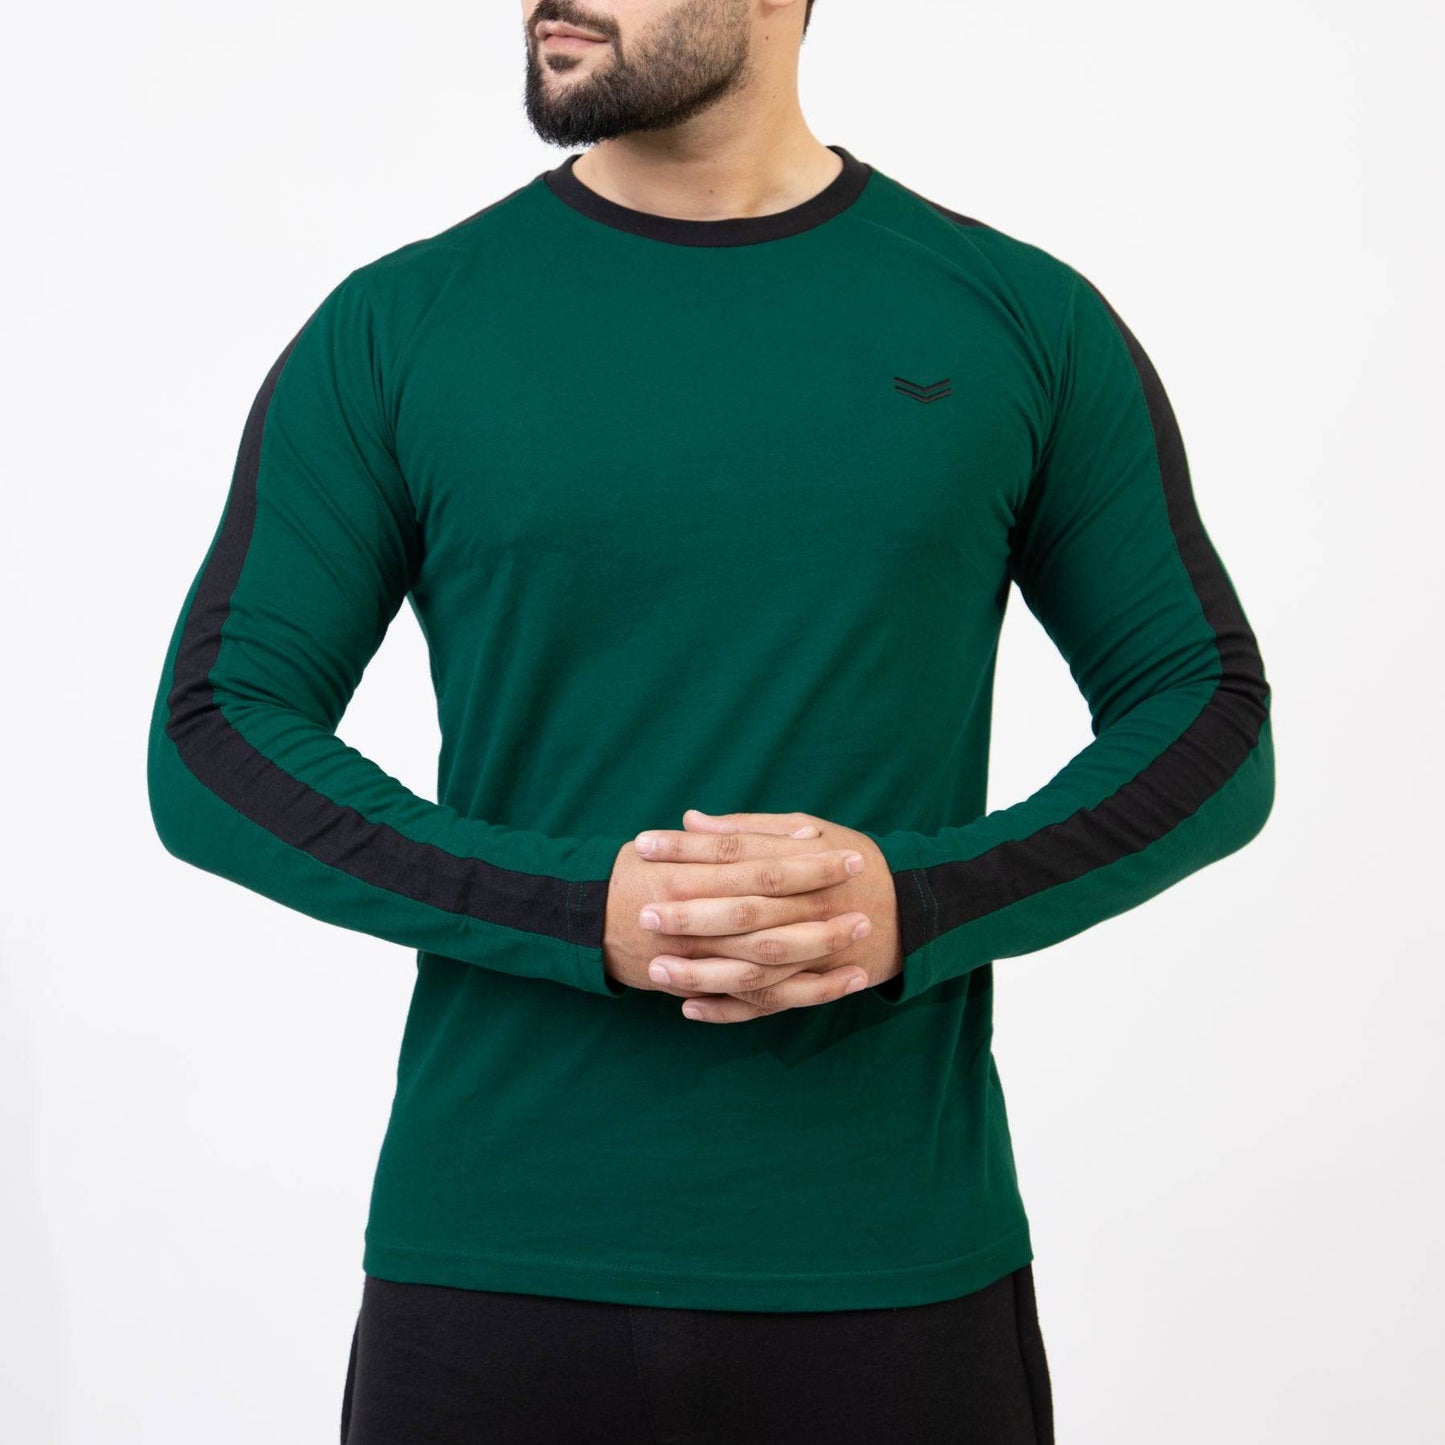 Green Full Sleeves T-Shirt with Black Panels - Valetica Sports